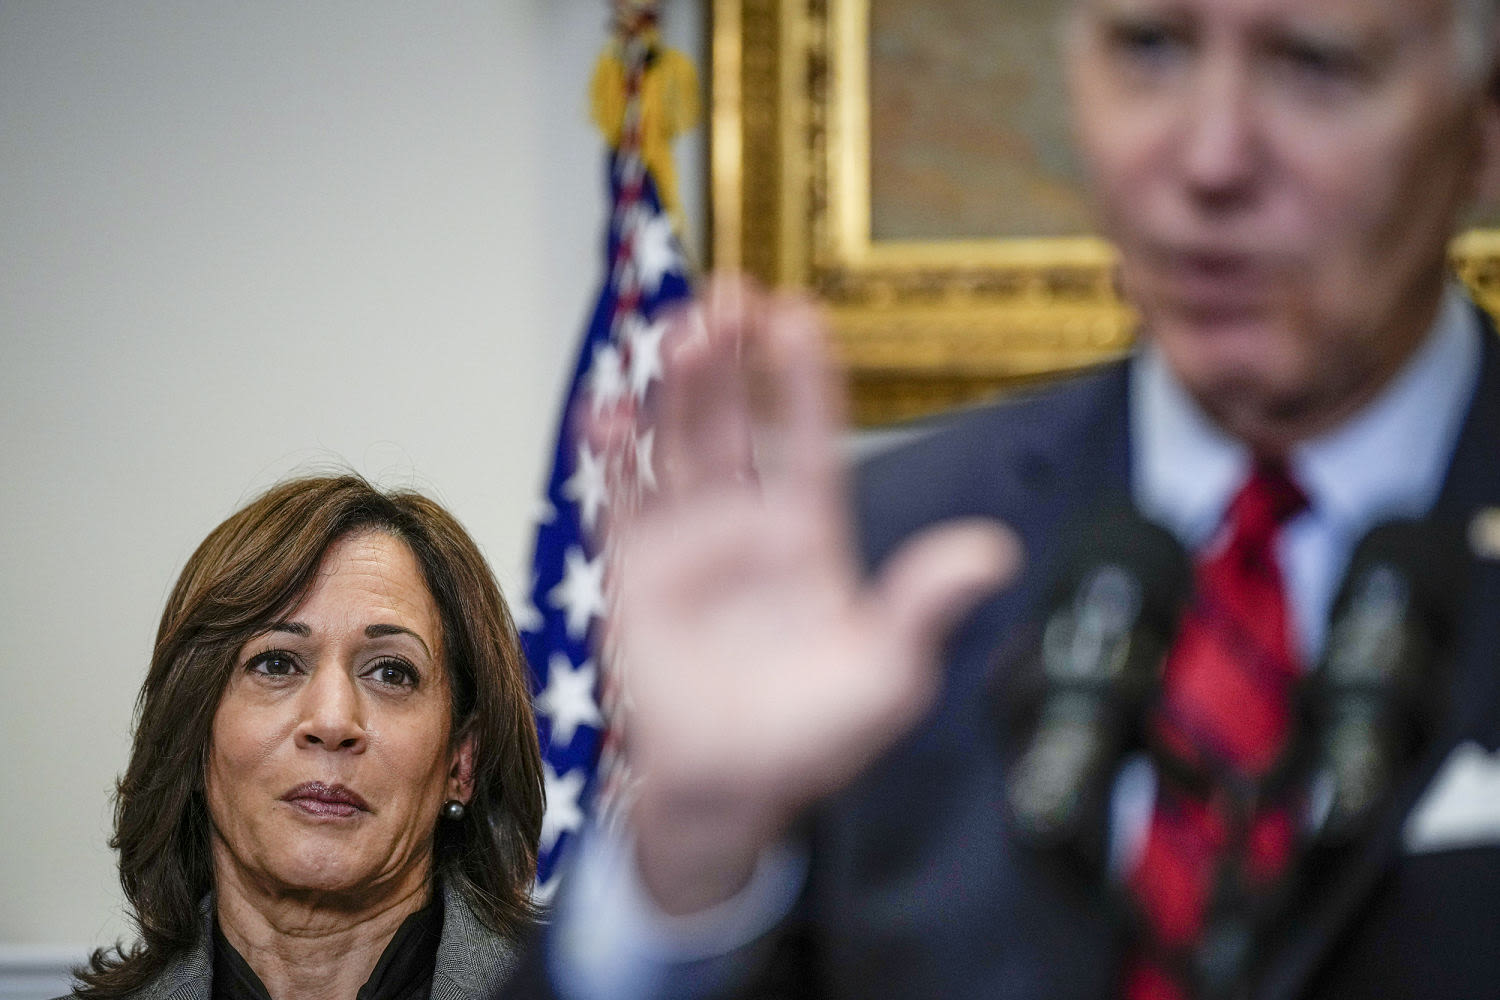 Trump zeroes in on 'border czar Harris' attack as her campaign pushes back